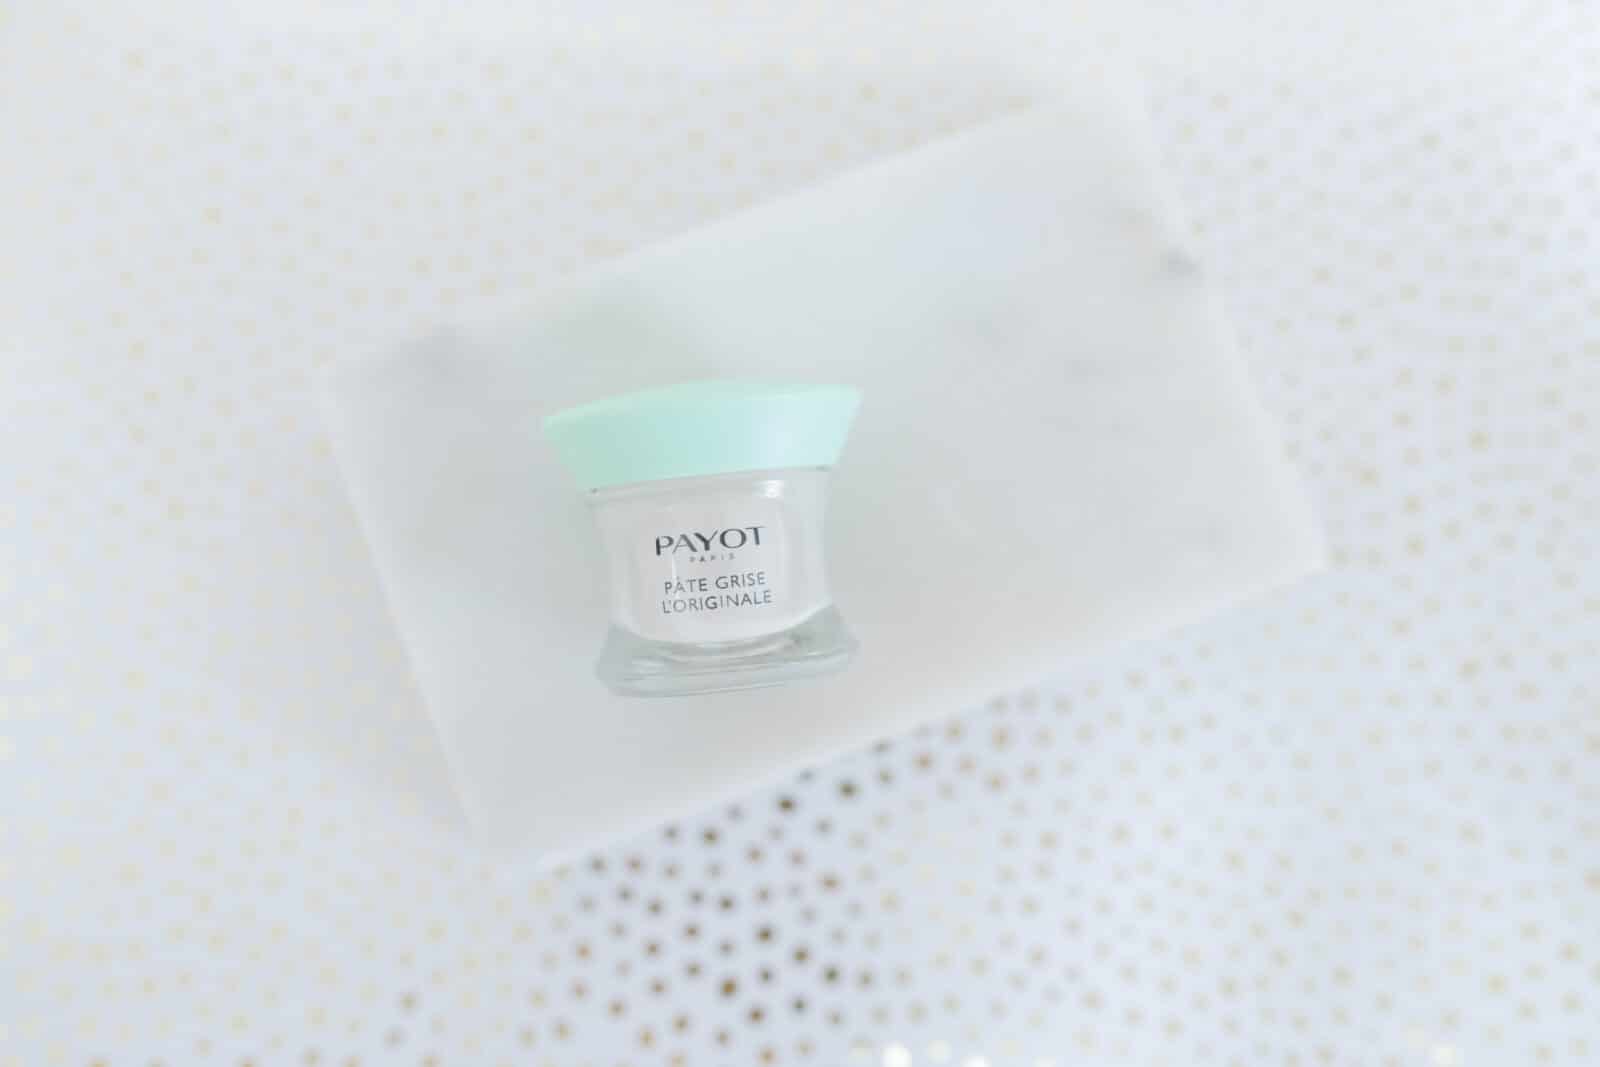 Payot Paris Emergency Anti-Imperfections Care Review